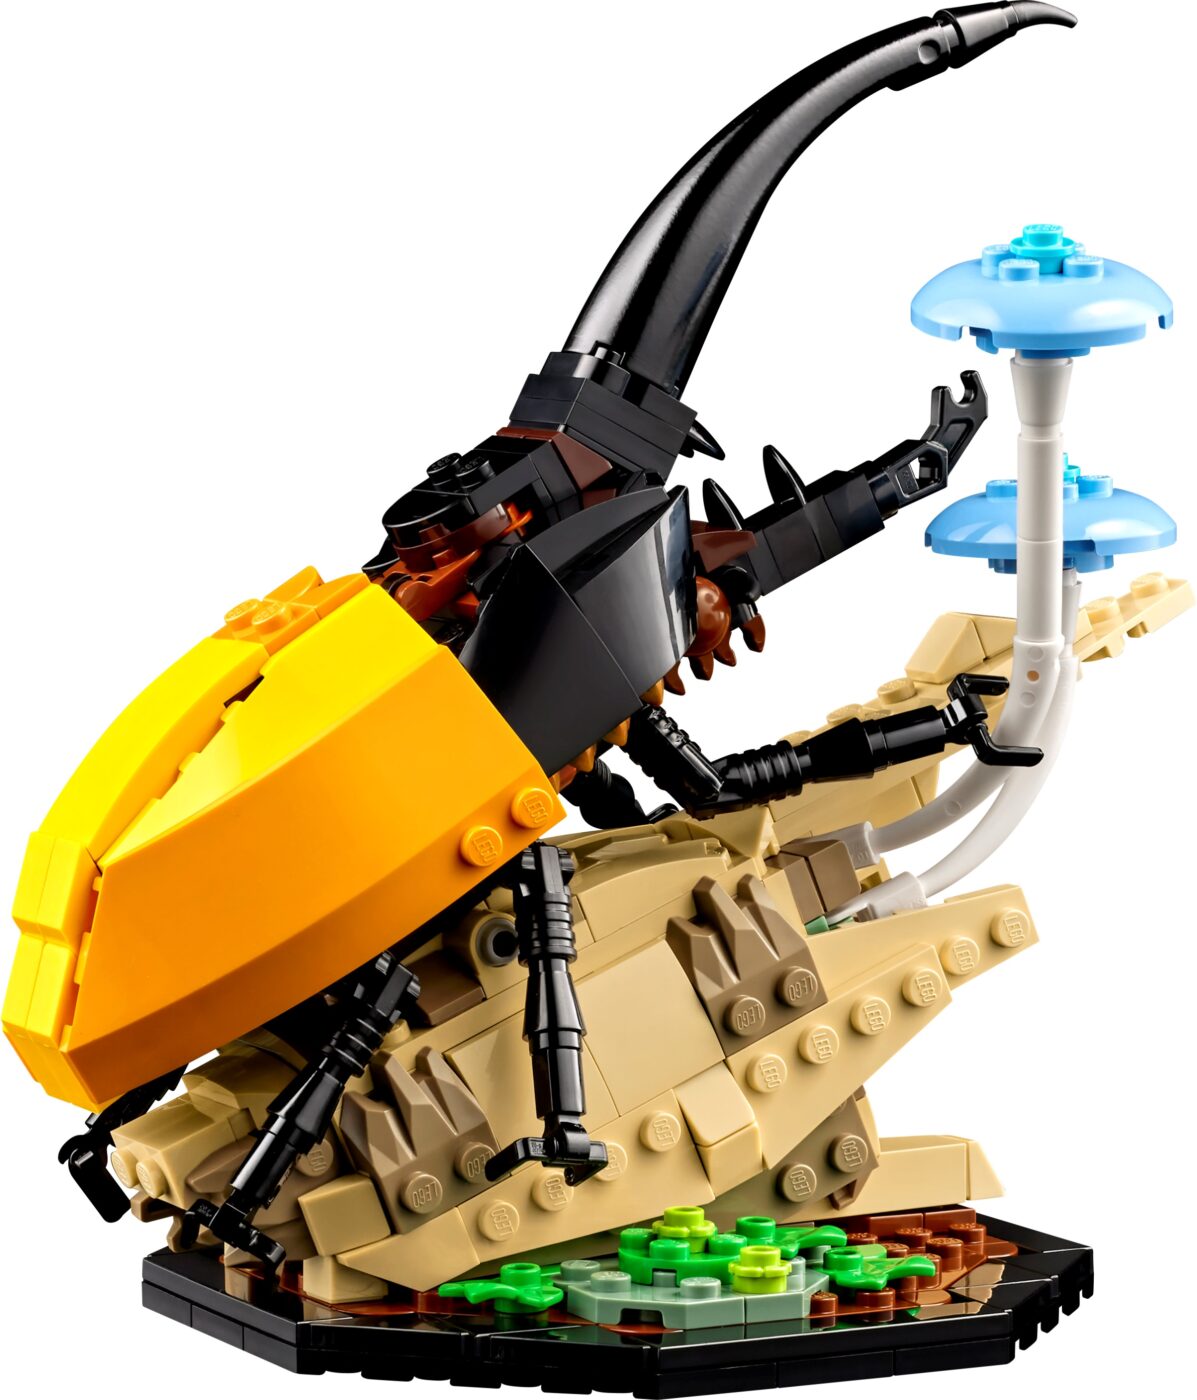 21342 LEGO Insect Collection Hercules beetle